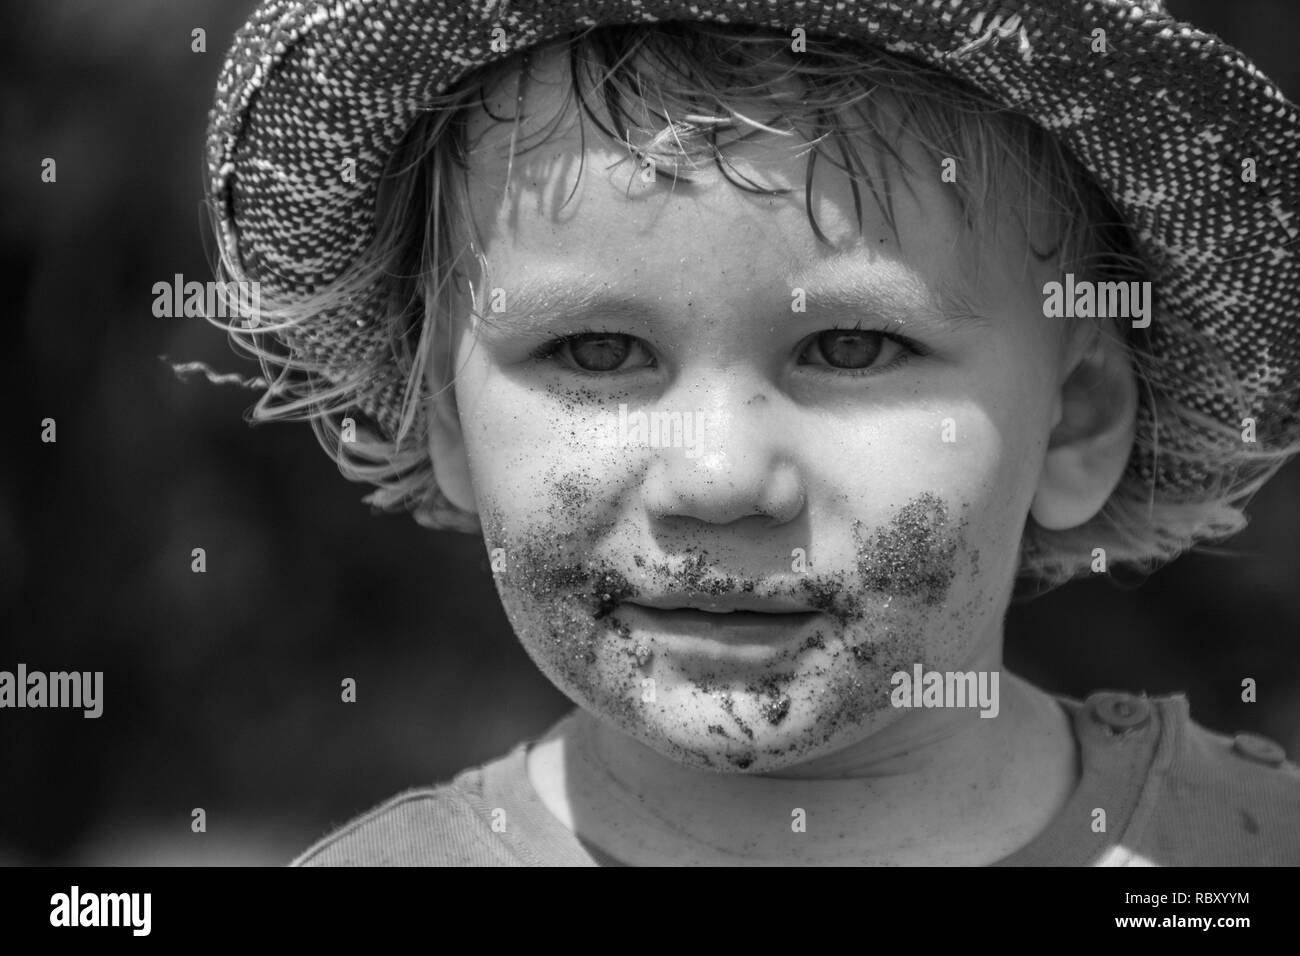 A B&W portrait of a young boy wearing a rugged hat Stock Photo